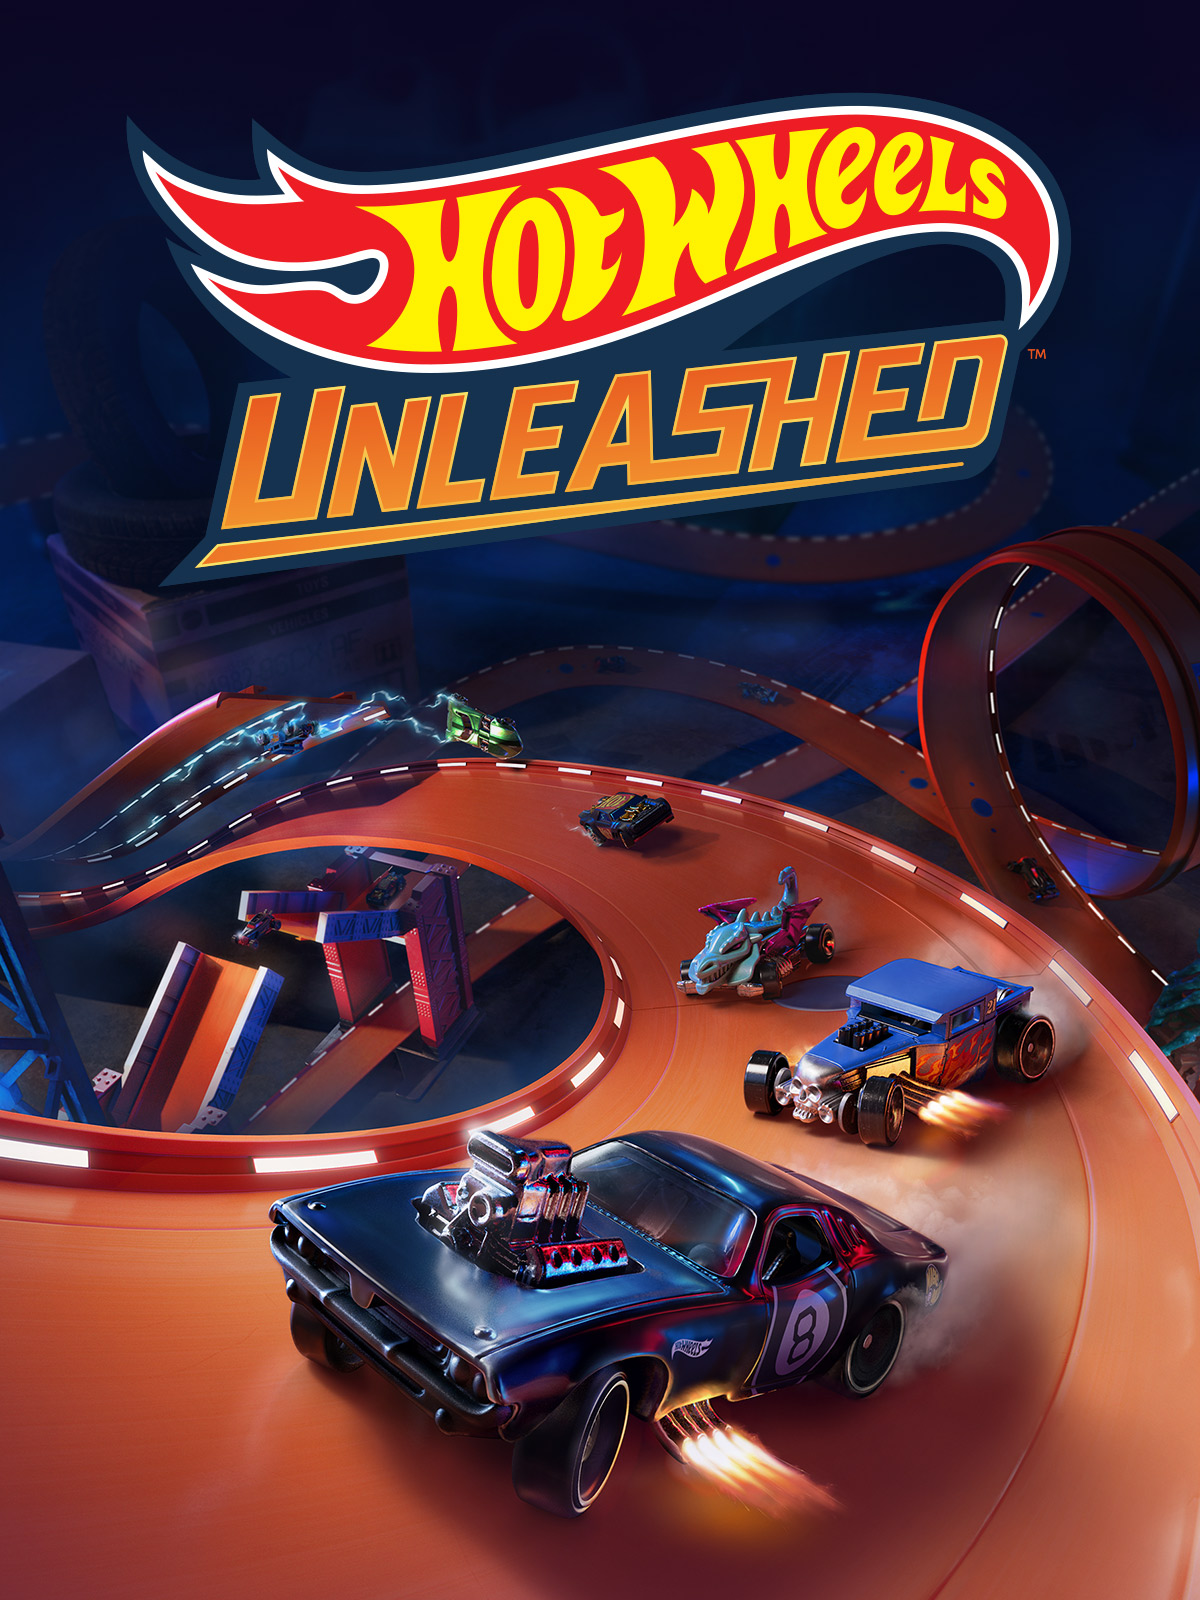 HOT WHEELS UNLEASHED™ 2 – TURBOCHARGED TO INCLUDE FAST & FURIOUS VEHICLES - Hot  Wheels Unleashed 2